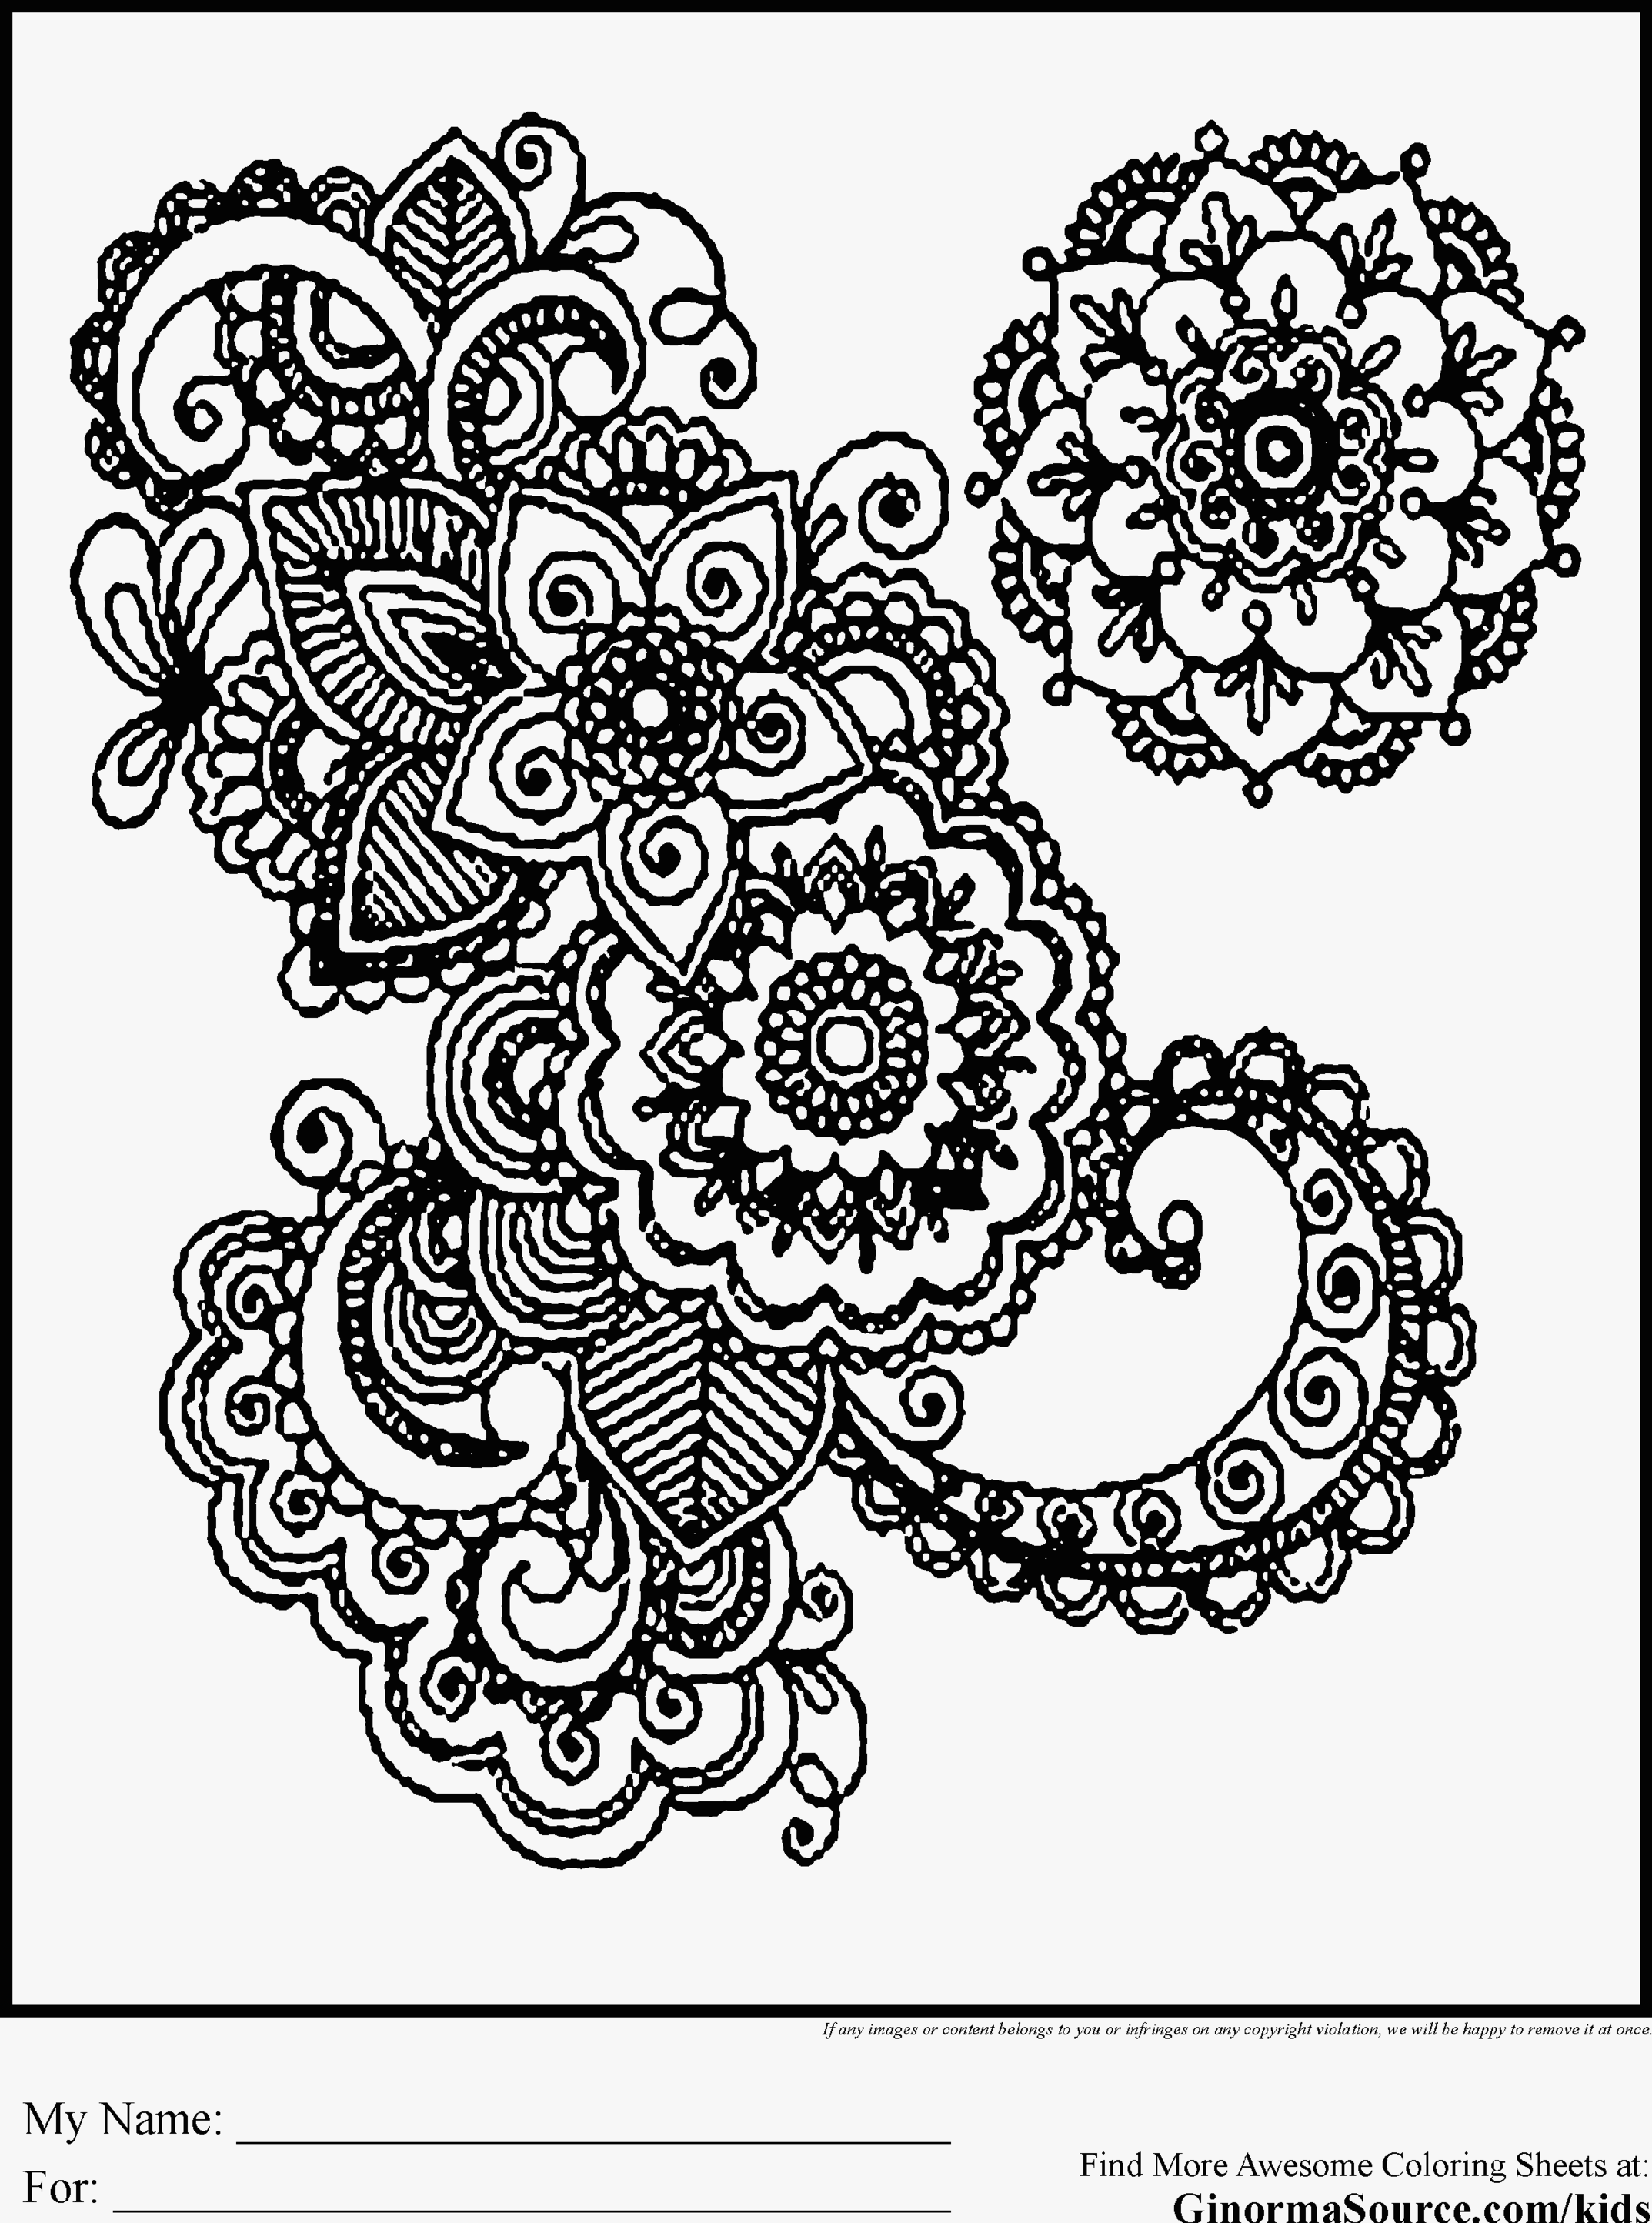 Printable Abstract Coloring Pages Awesome - Coloring pages